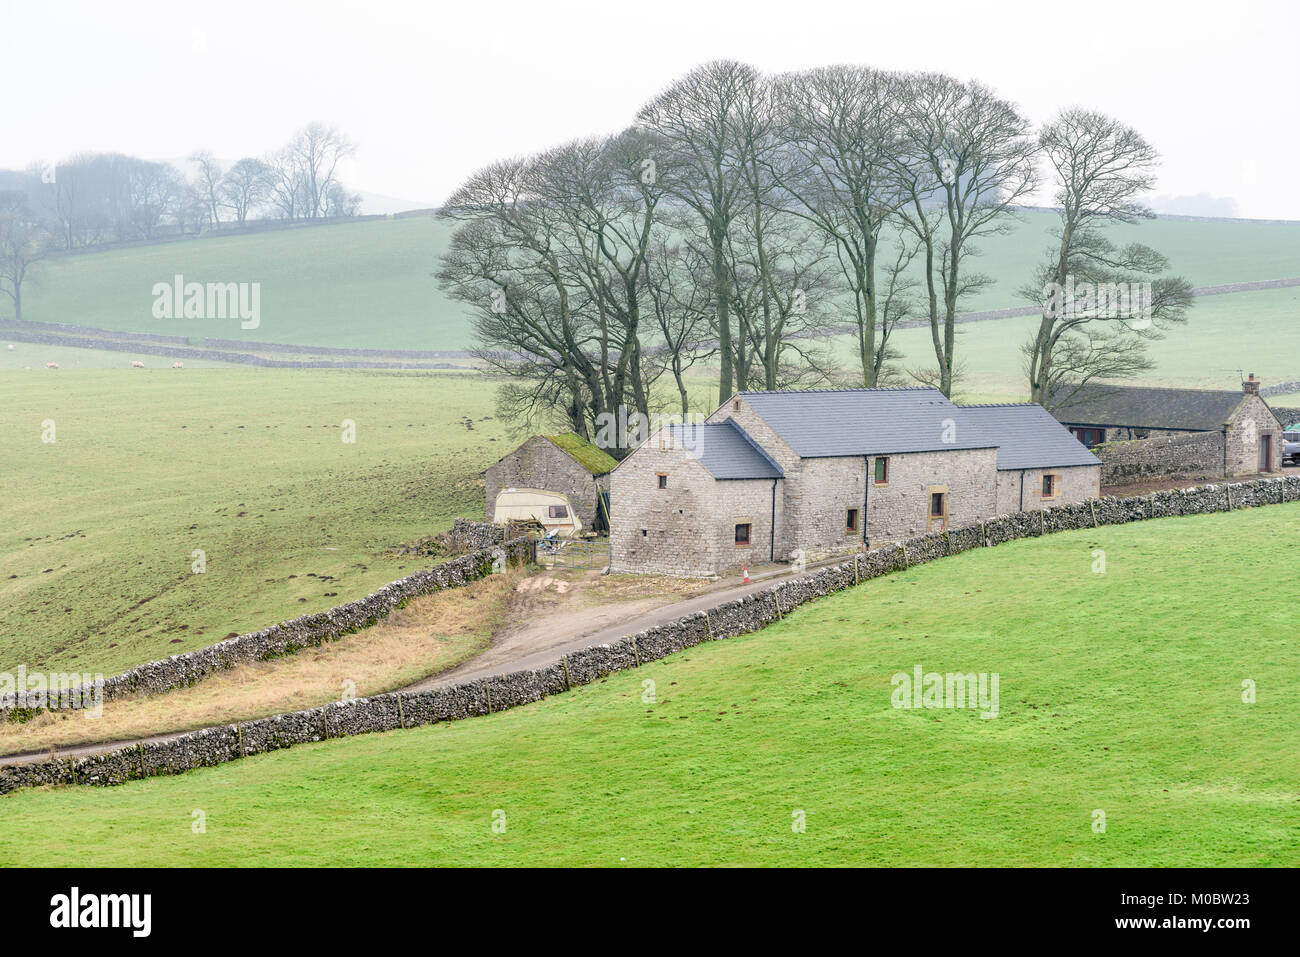 Refurbished farm house as seen from the Tissington trail in mid winter on the Peak district at Alsop moor, Derbyshire, England. Stock Photo